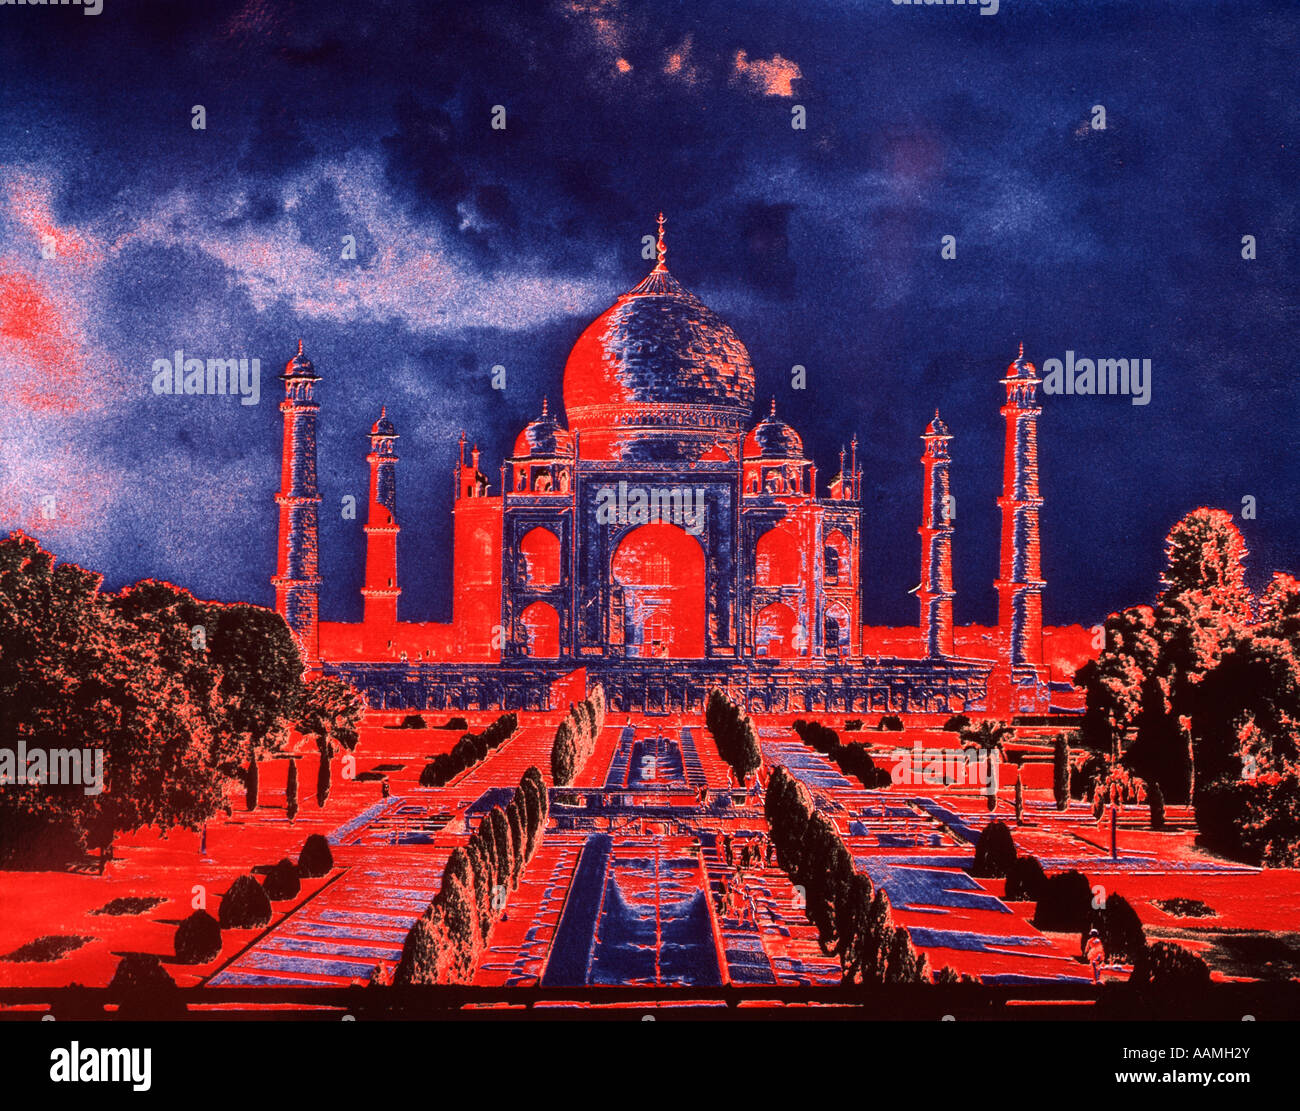 INDIA TAJ MAHAL TOMB MONUMENT TO LOVE POSTERIZED SPECIAL EFFECT Stock Photo